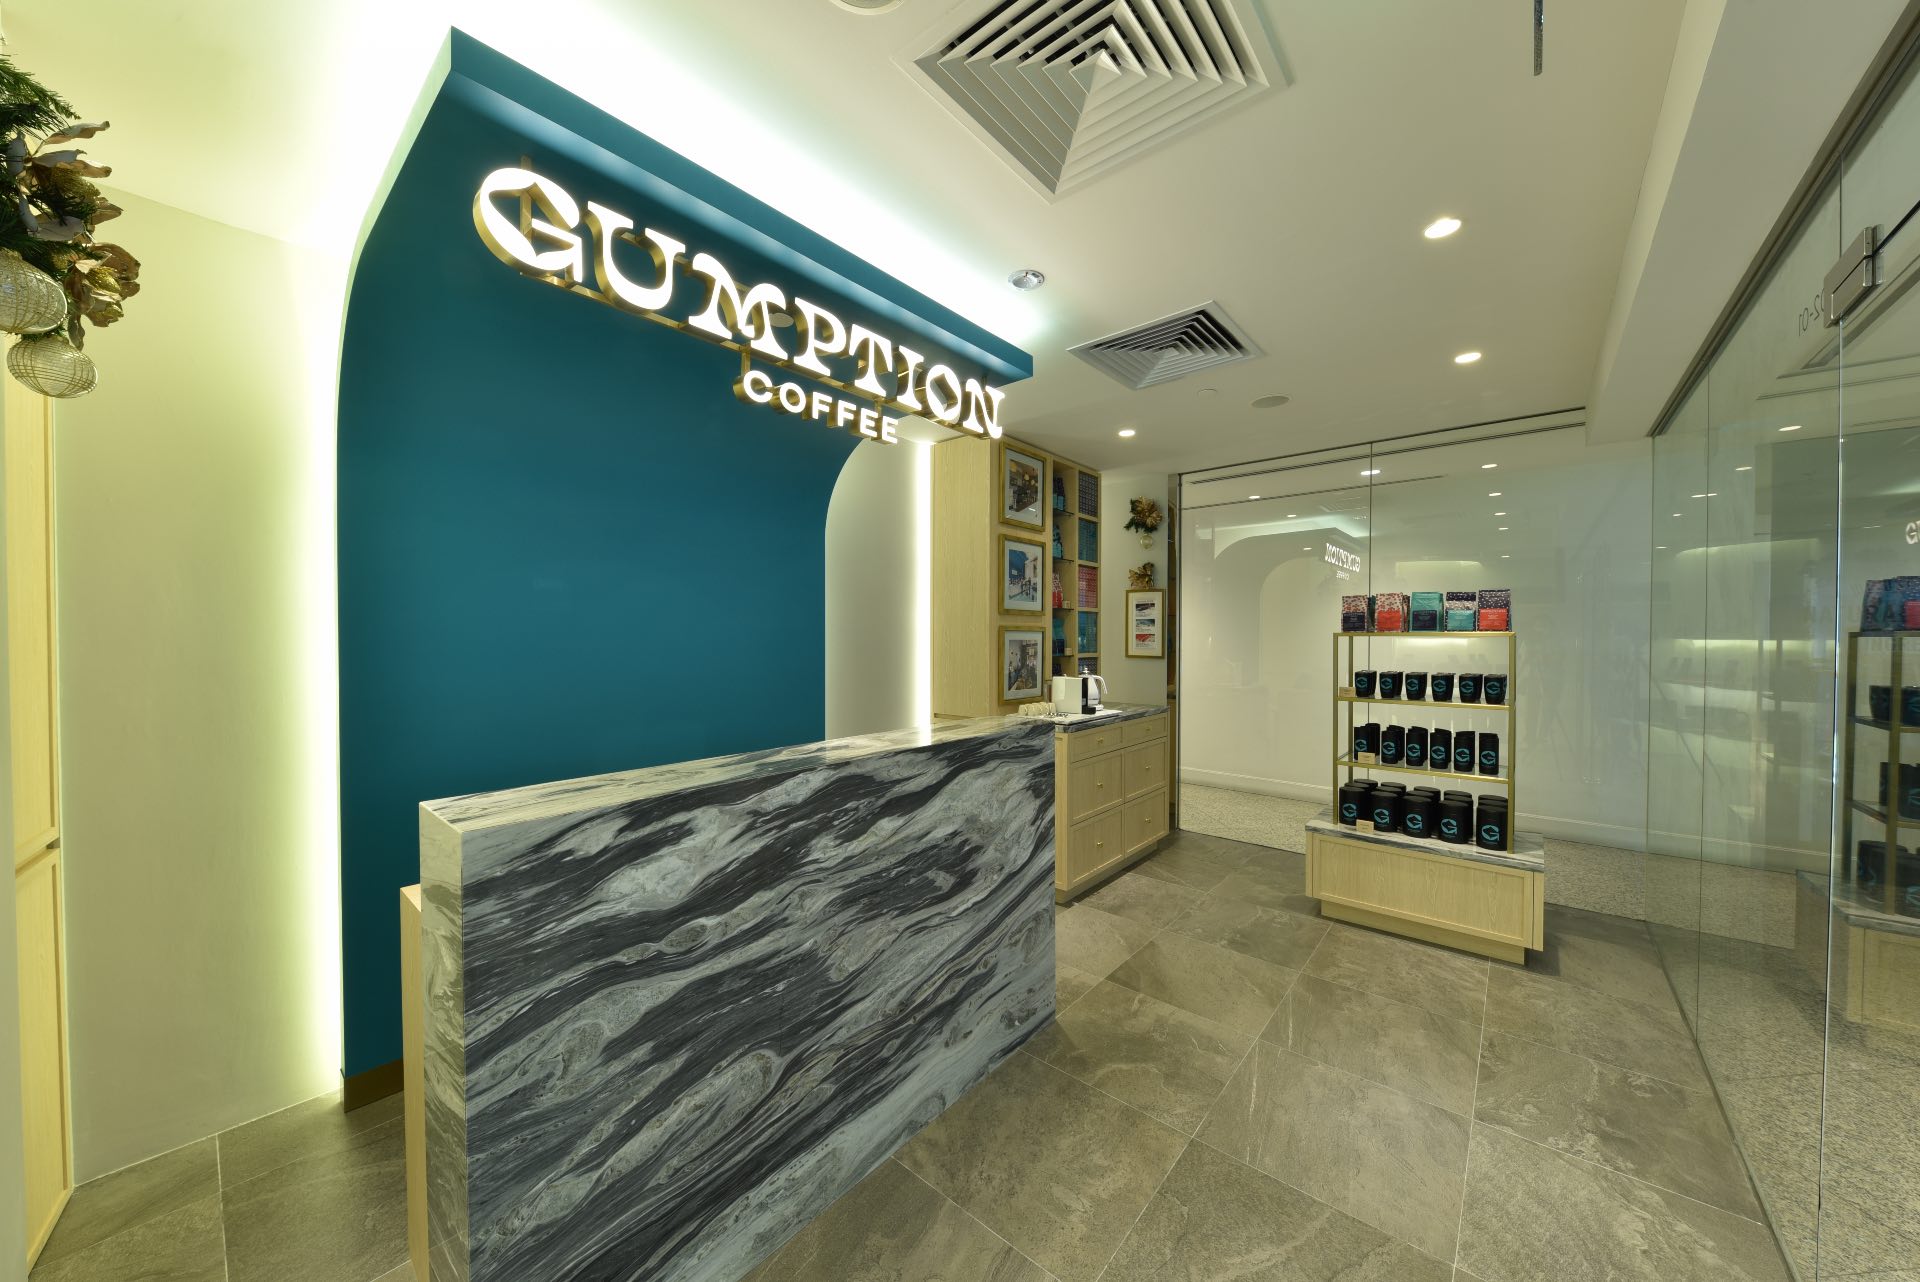 Gumption coffee at Wheelock Place